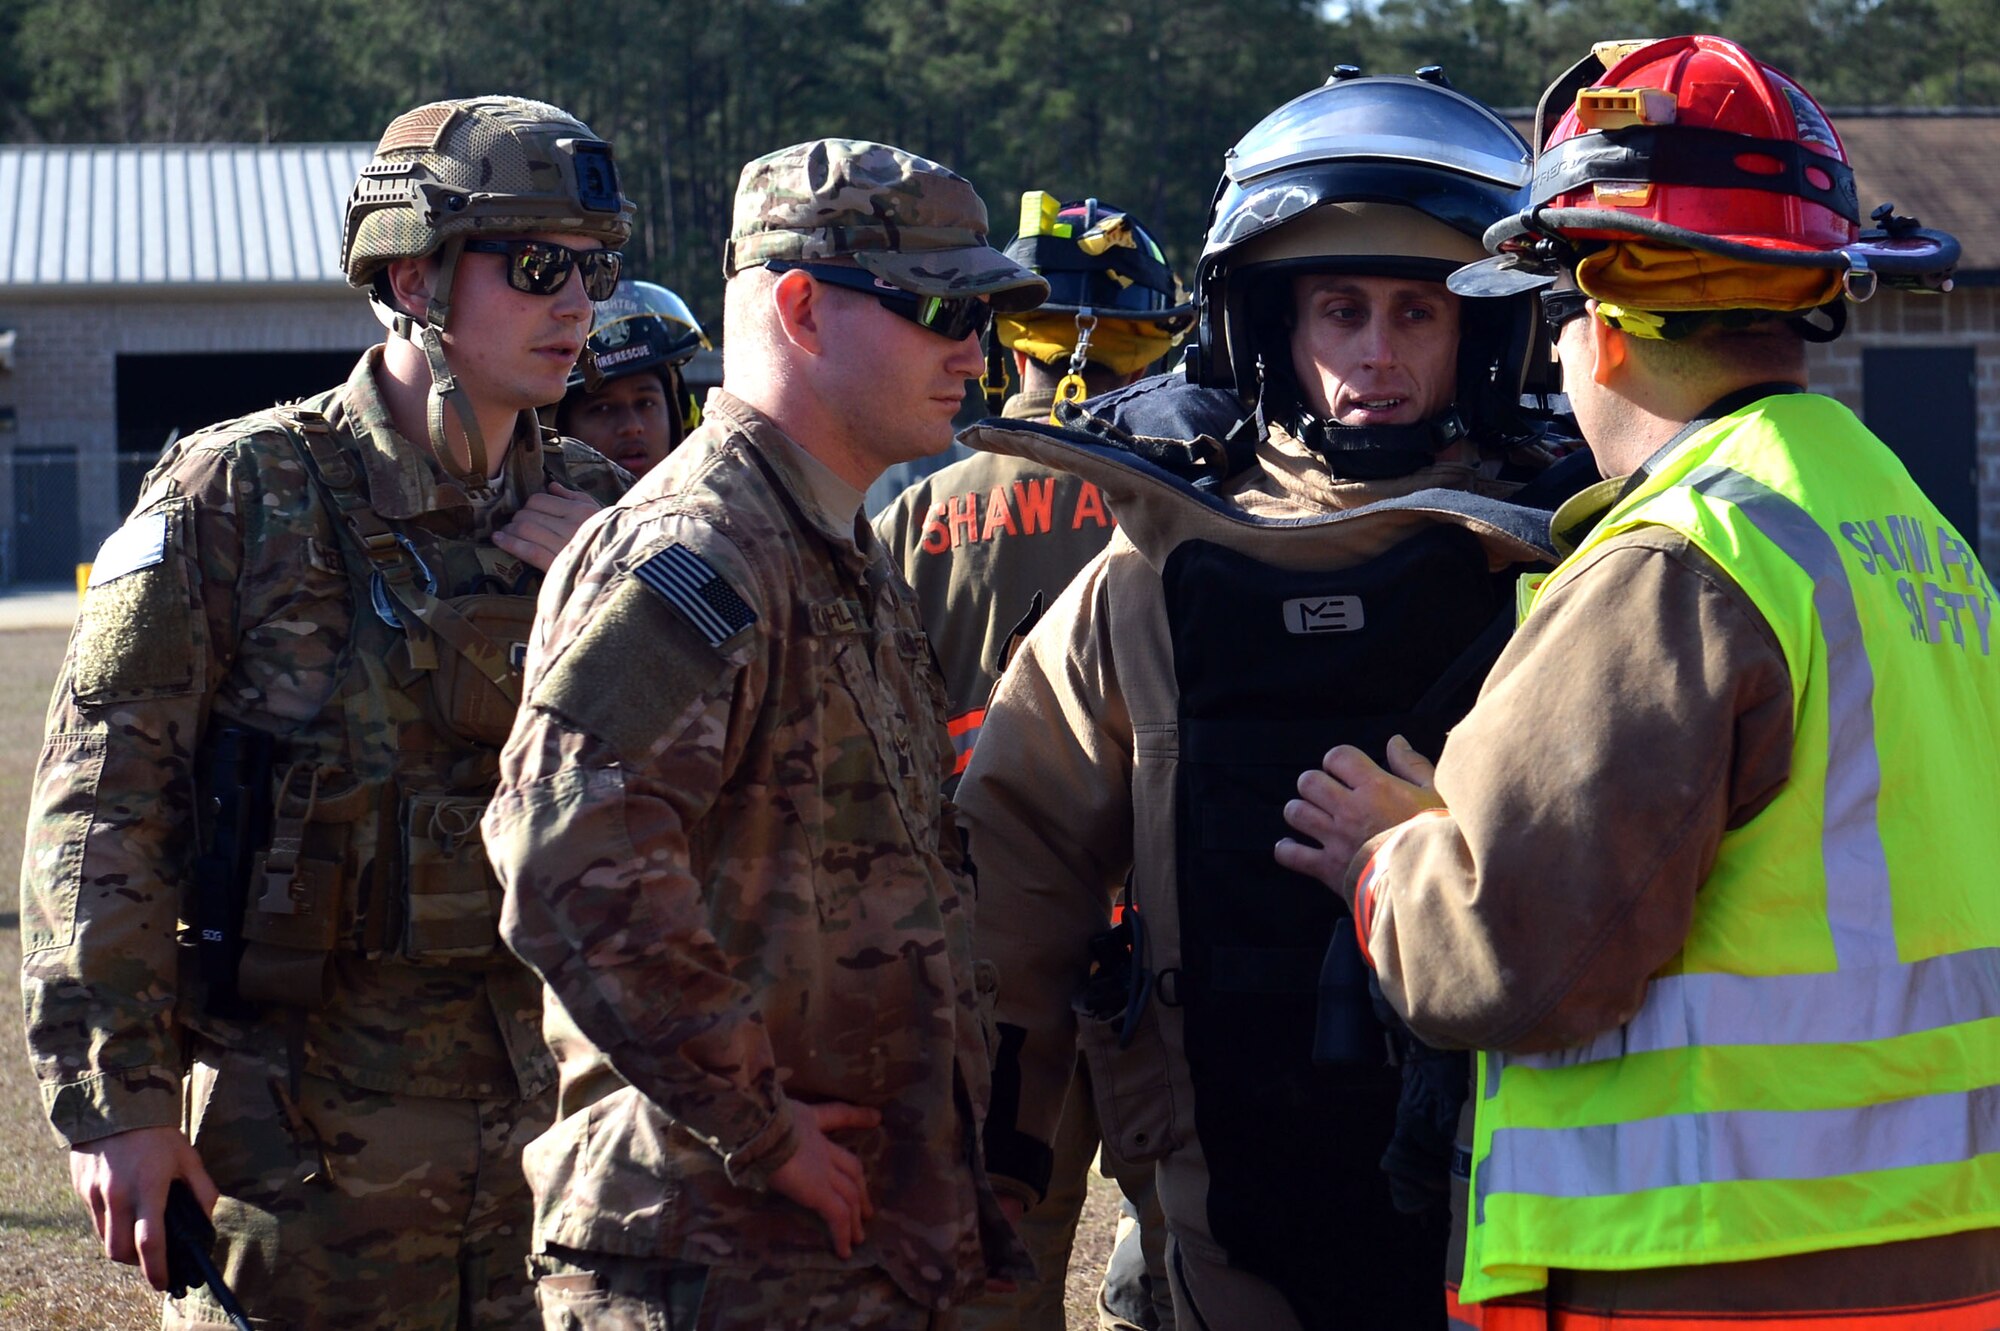 U.S. Airmen assigned to the 20th Civil Engineer Squadron fire department and 20th CES explosive ordnance disposal flight discuss a plan of action before participating in a joint hazardous material training at Shaw Air Force Base, S.C., Jan. 19, 2017. The Airmen handled a scenario where an overturned truck spilled simulated chemicals into the environment, caused casualties, and had a possible explosive device in the vicinity. (U.S. Air Force photo by Airman 1st Class Christopher Maldonado)